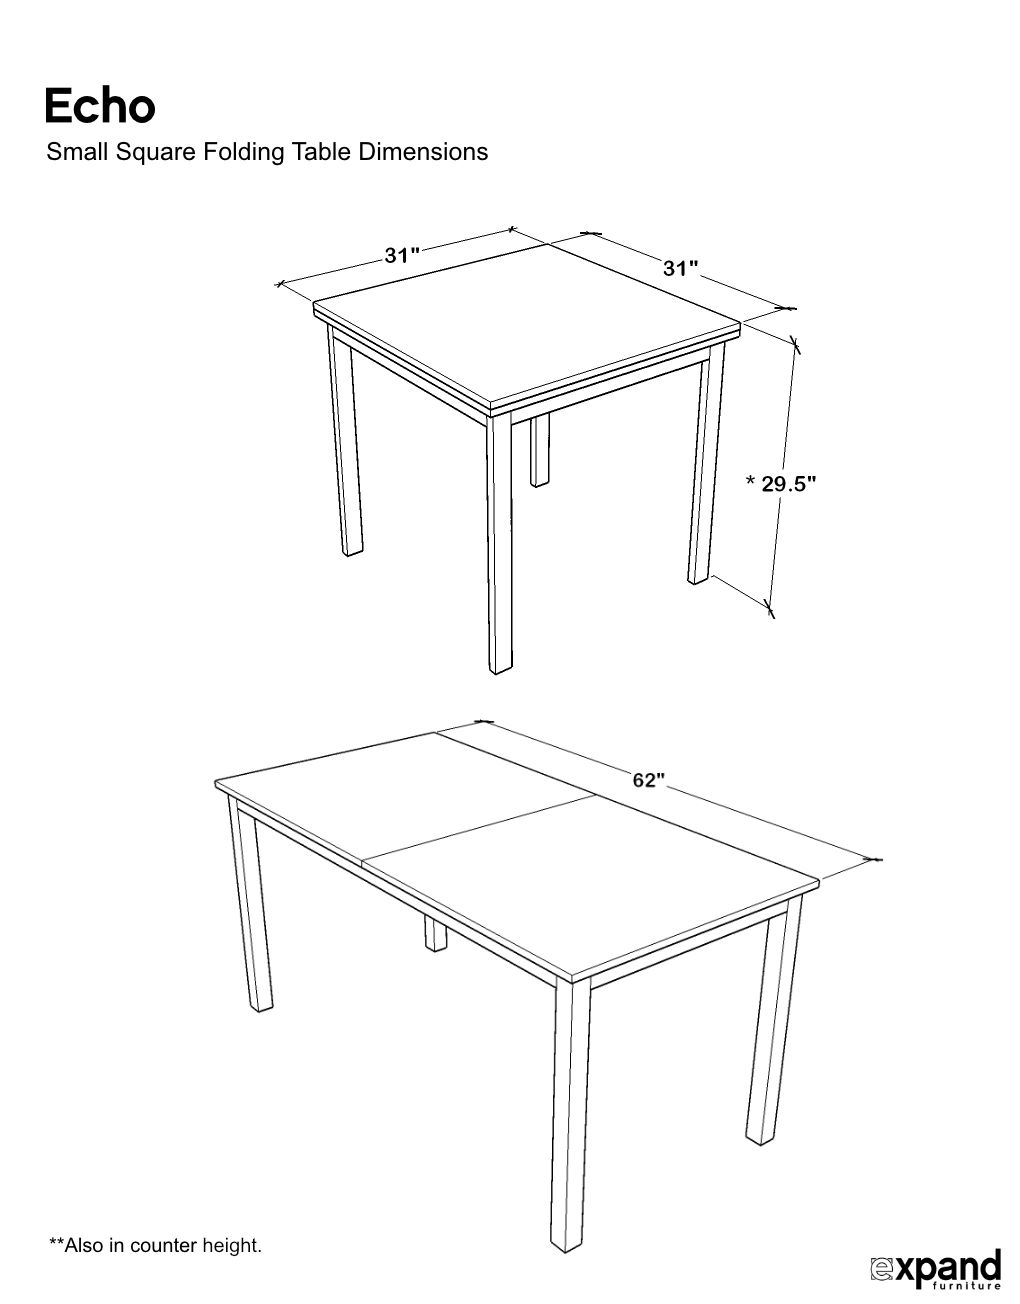 Echo Small Square Folding Kitchen Table Expand Furniture Folding Tables